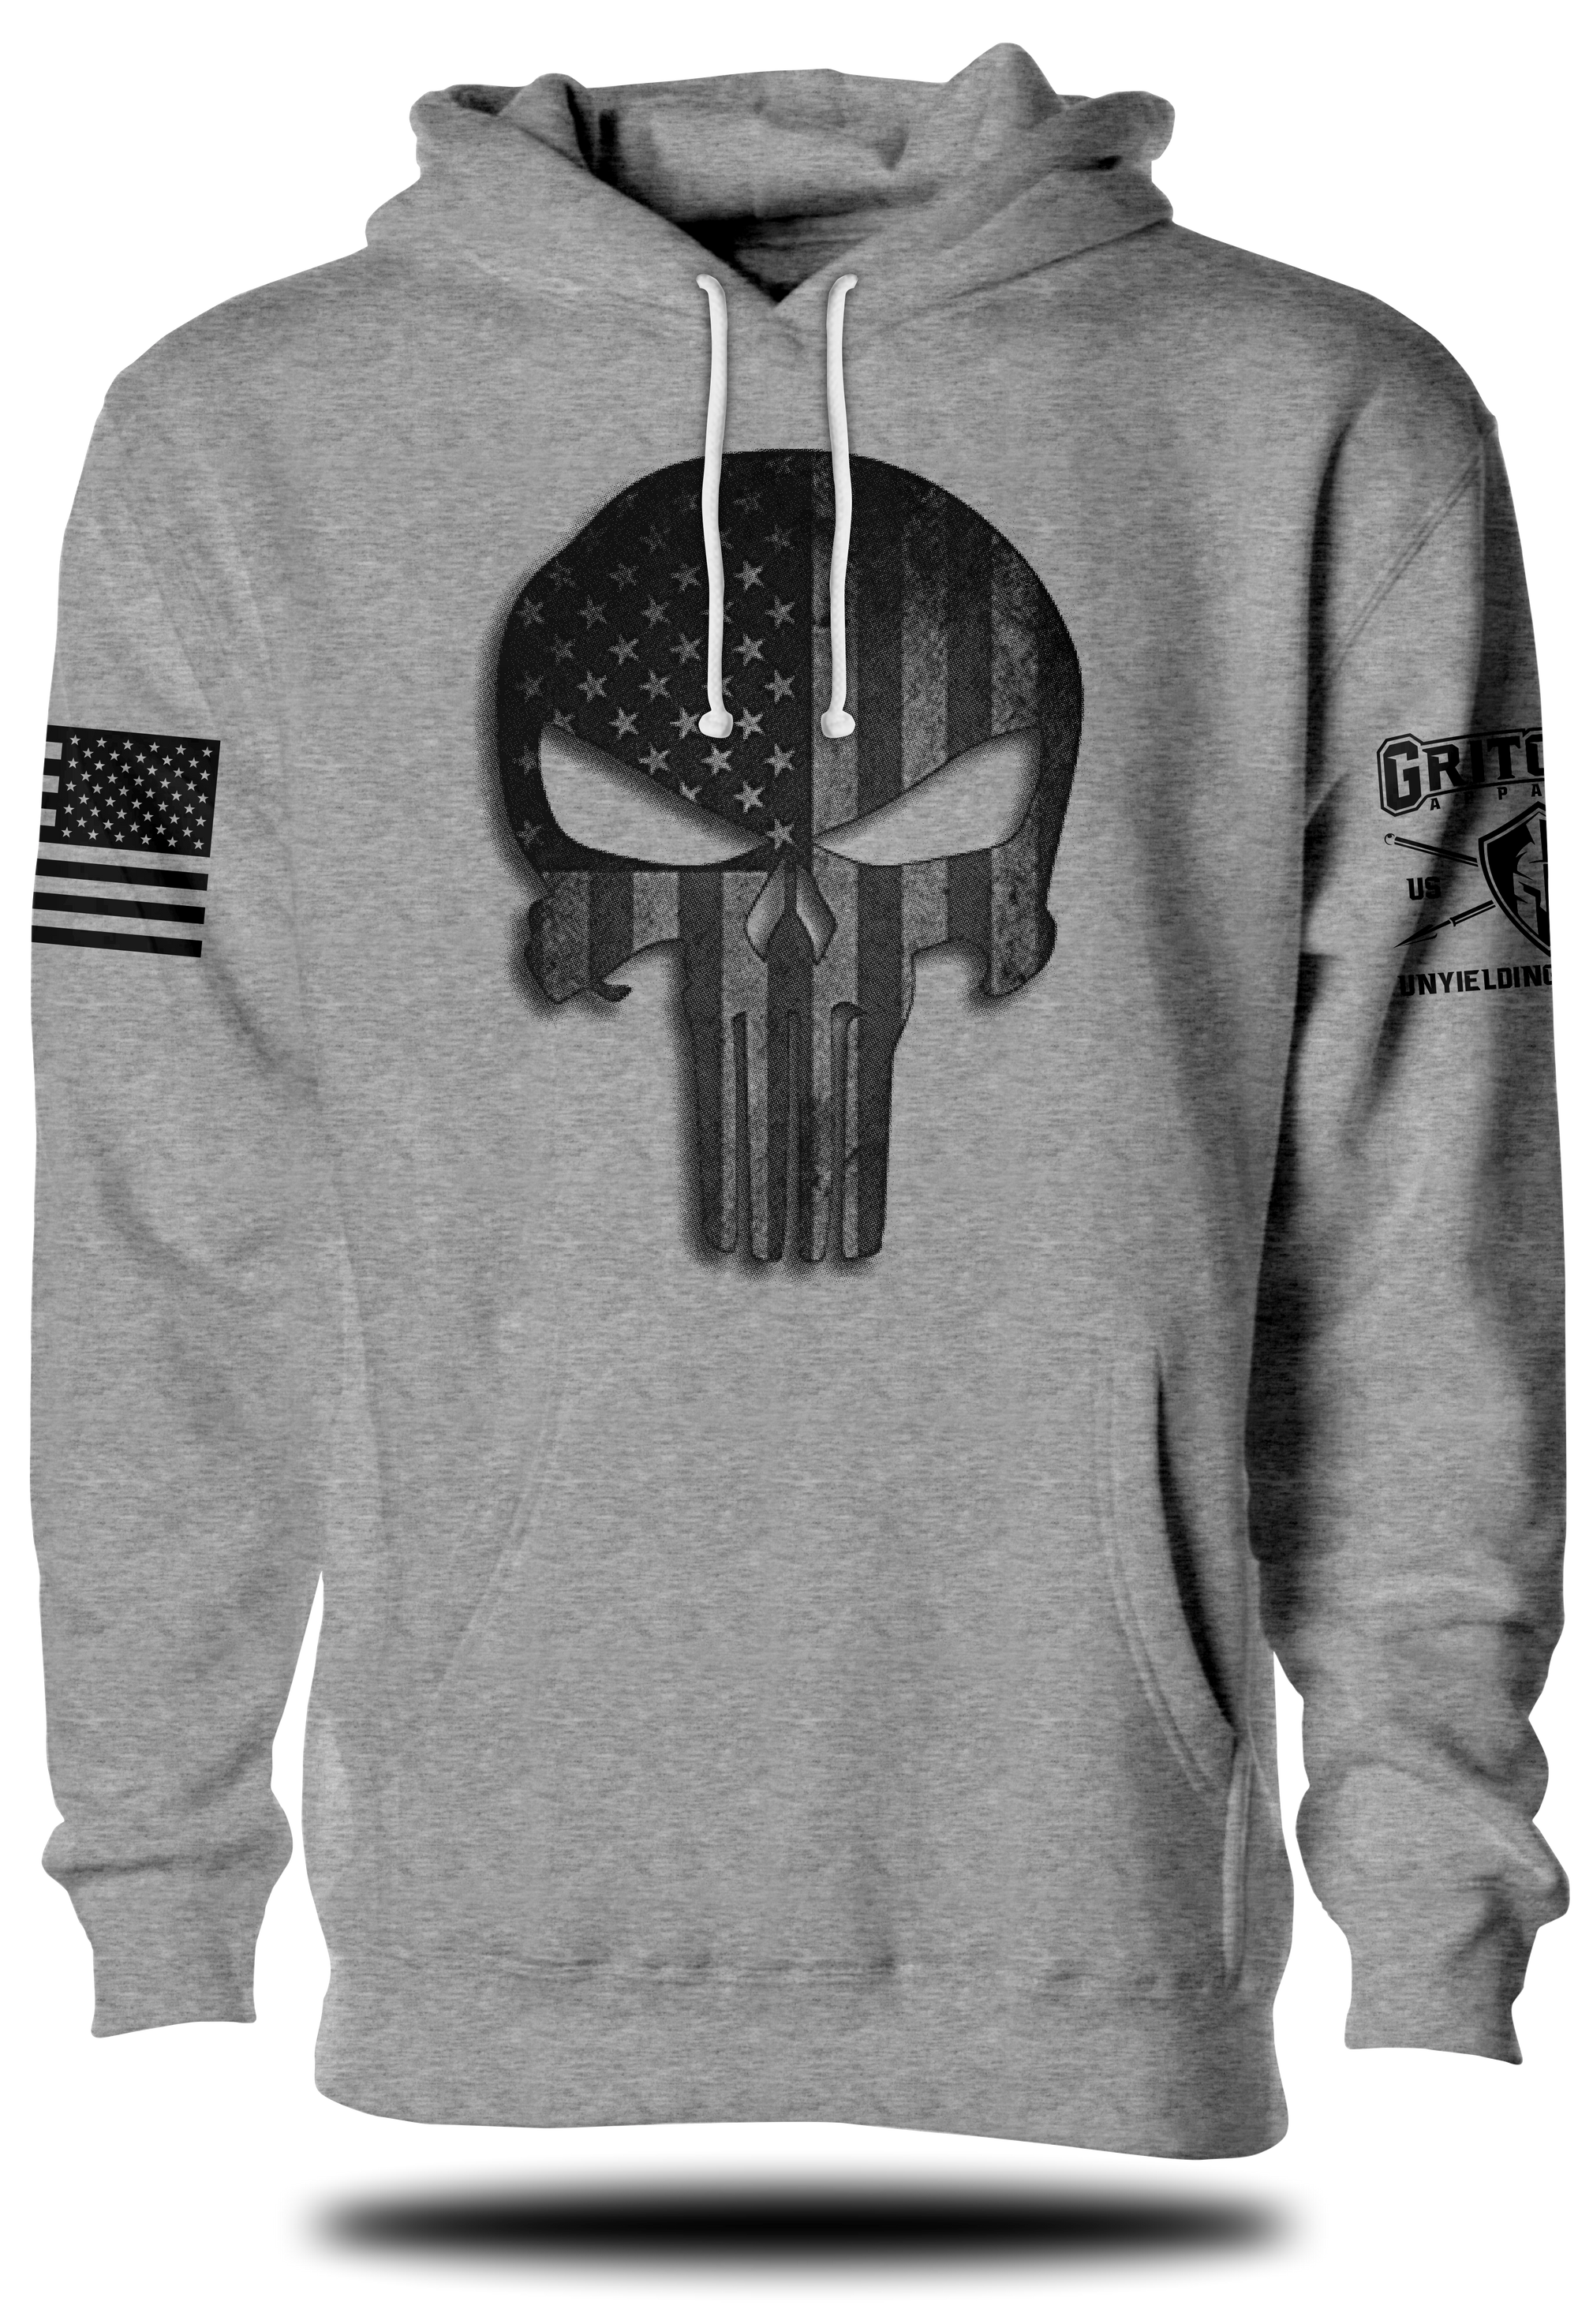 Punisher Stars and Stripes Hoodie | Grit Gear Apparel®